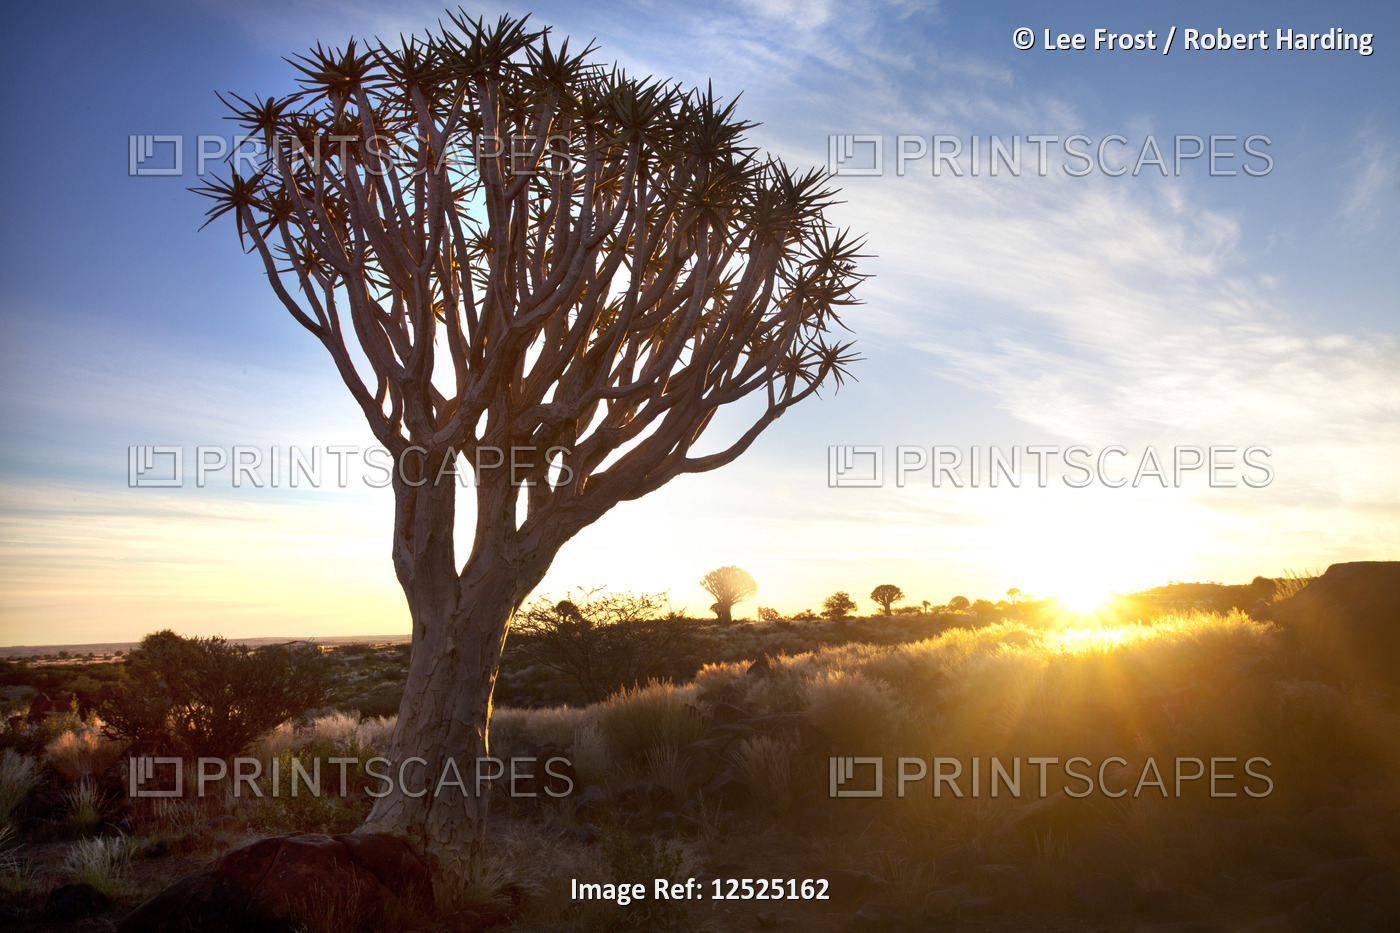 Quivertrees (Aloe dichotoma) (Kokerboom) in the Quivertree Forest on Farm Gariganus near Keetmanshop